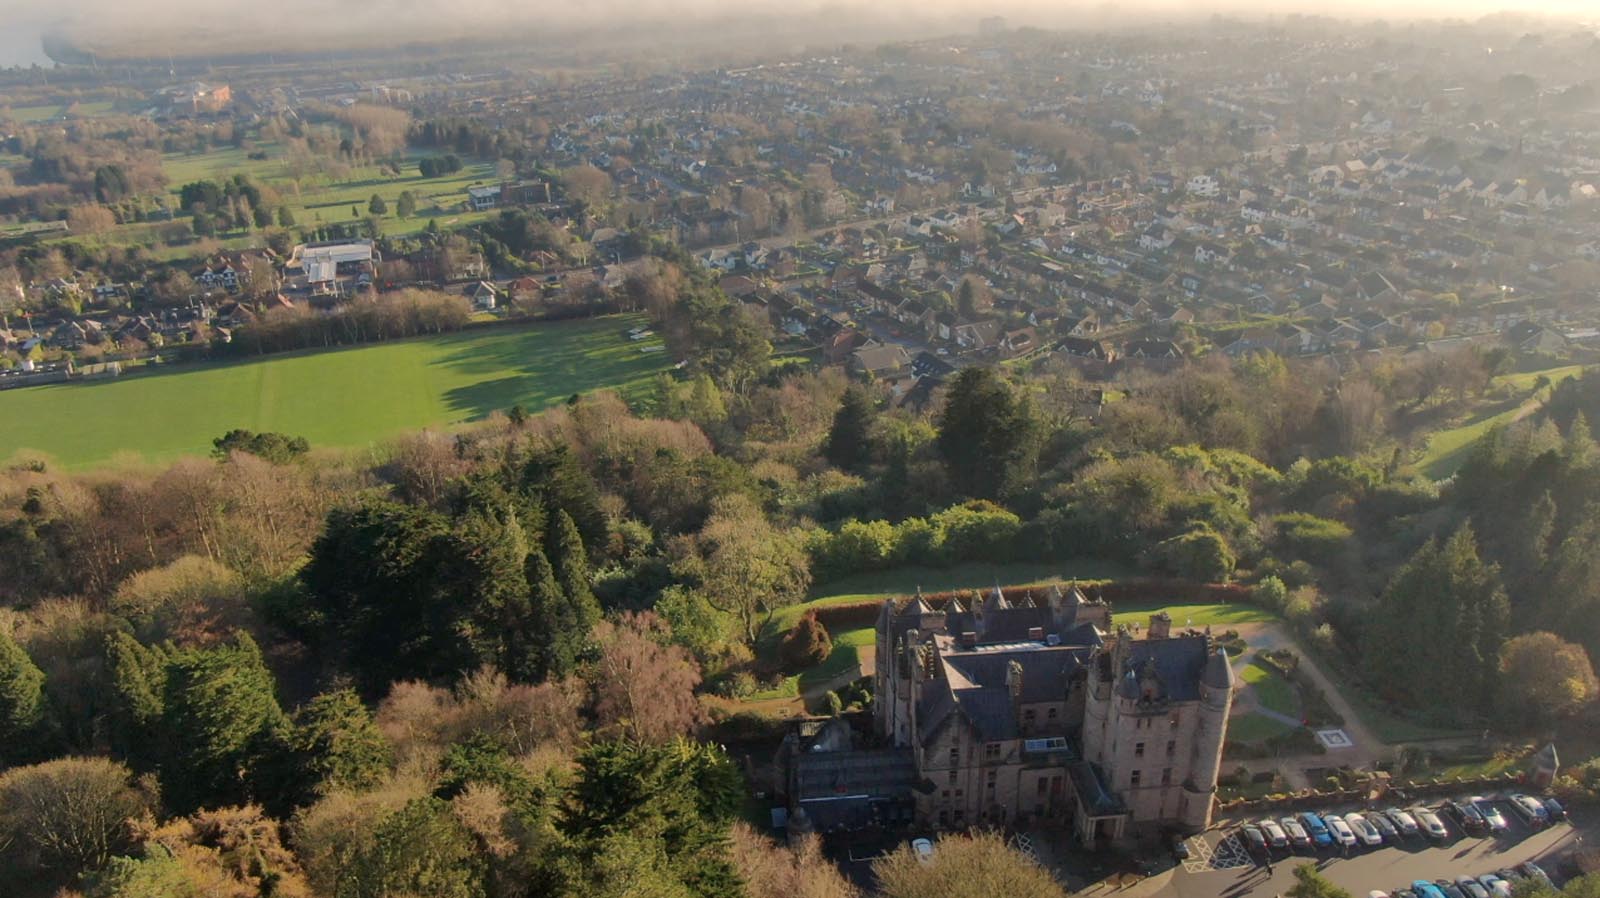 Aerial drone photography and video production services Dublin and Ireland portfolio - screenshot 4 of Belfast Castle 2 video